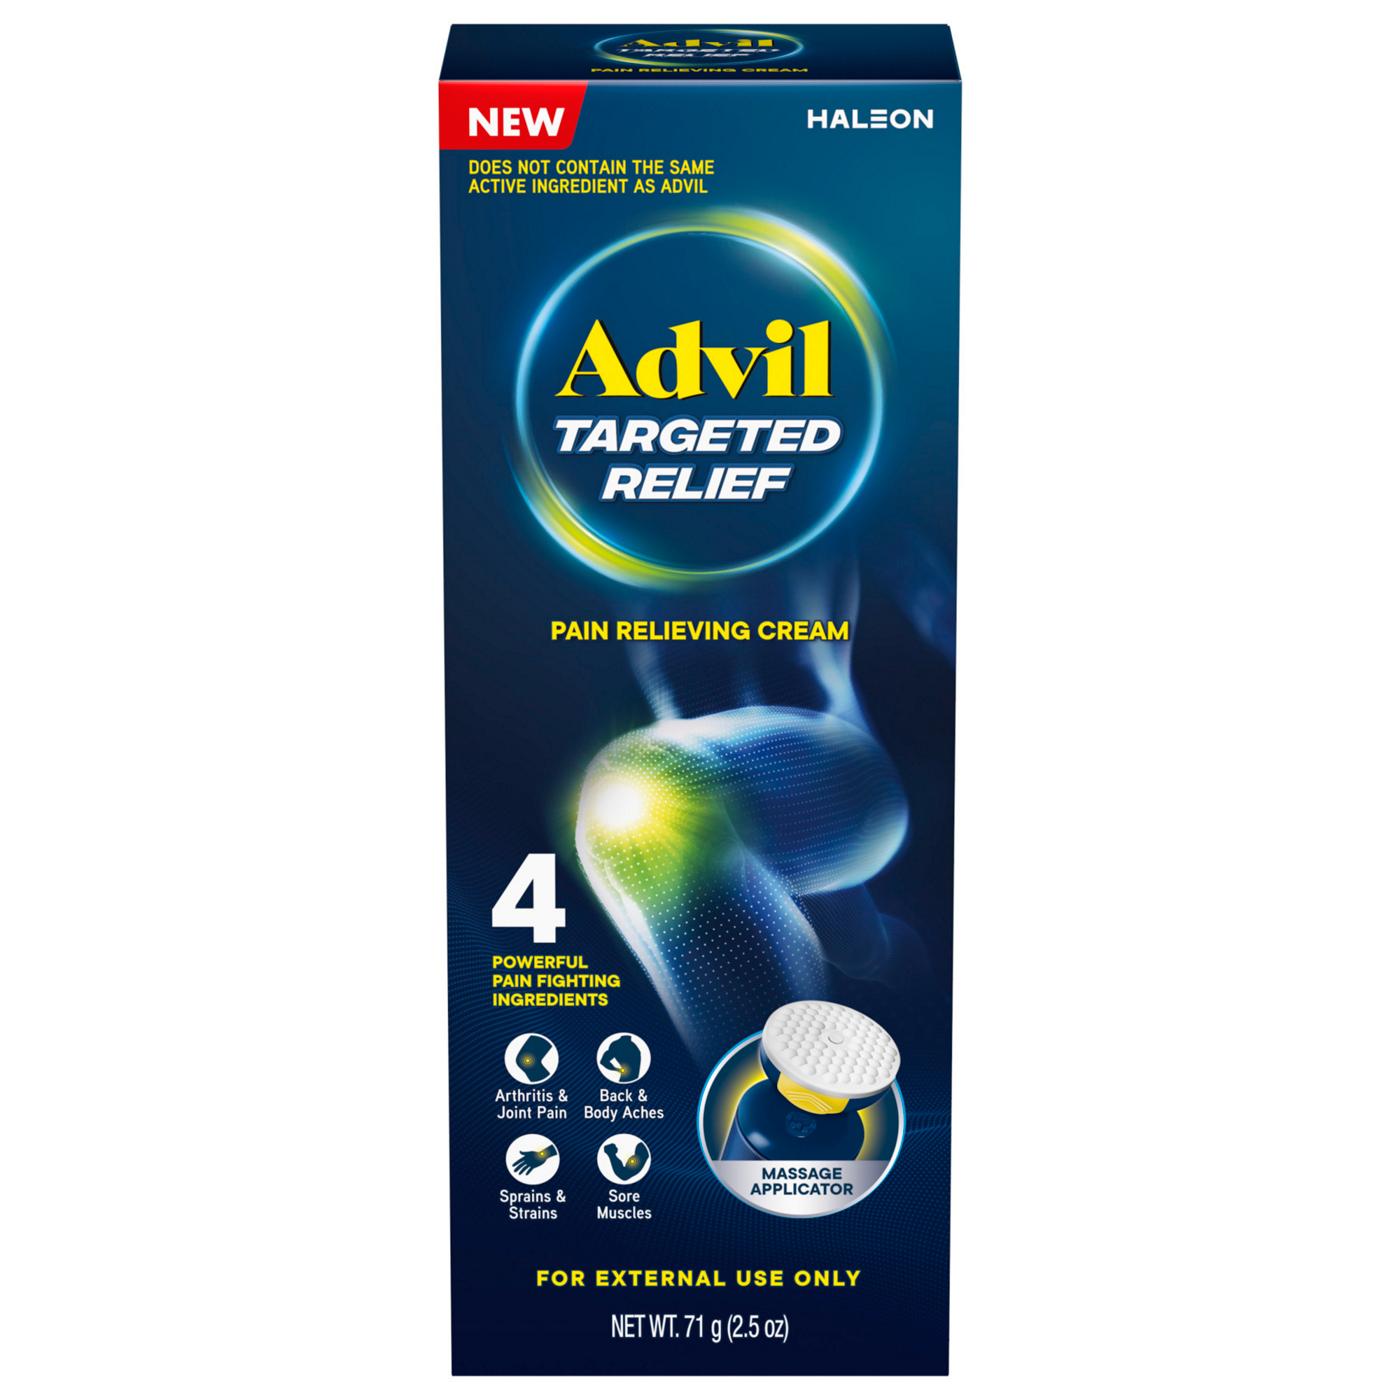 Advil Targeted Relief Pain Relieving Cream; image 1 of 7